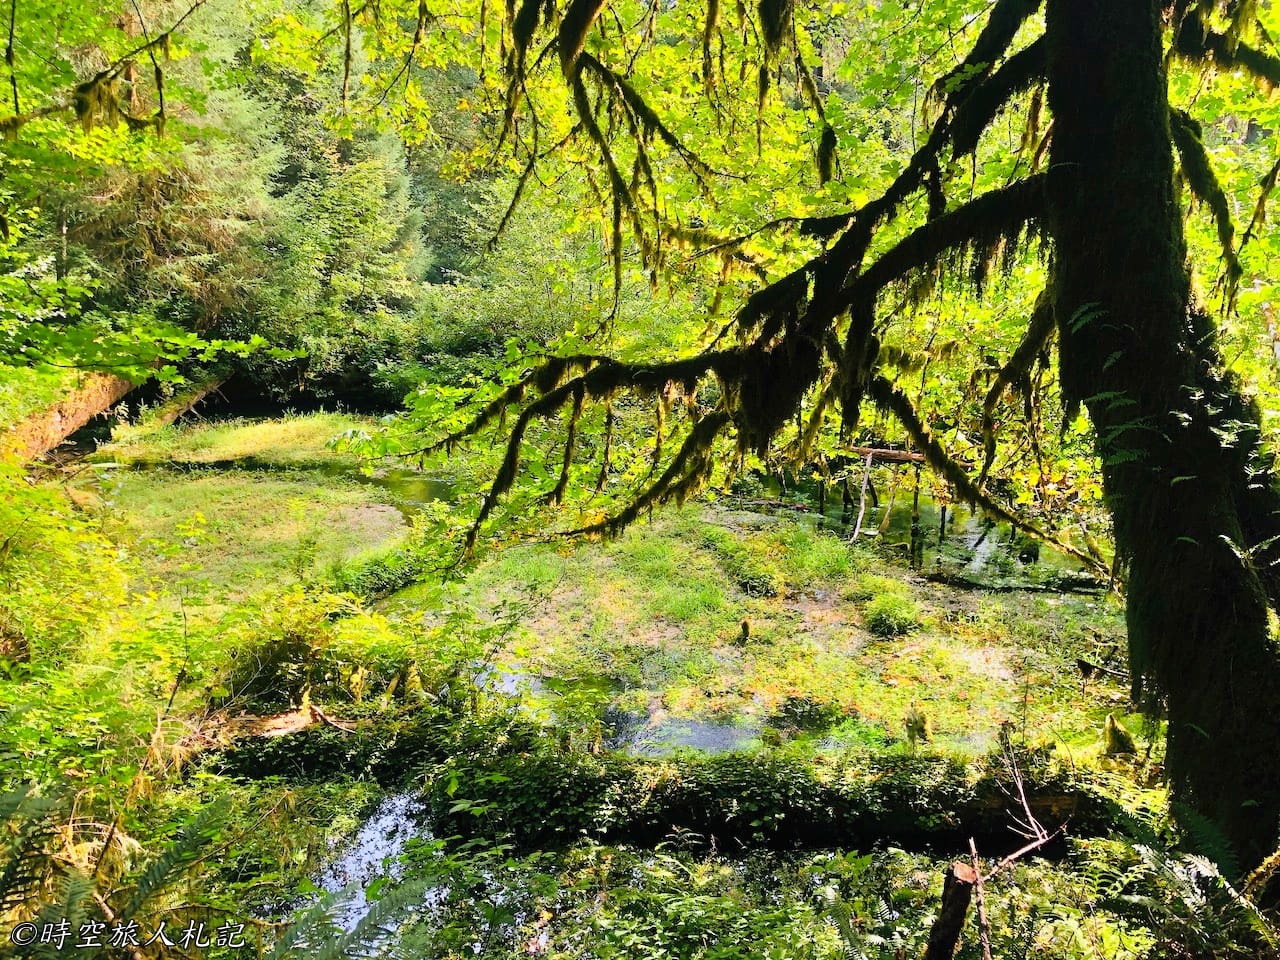 Olympic national park,奧林匹克國家公園 14